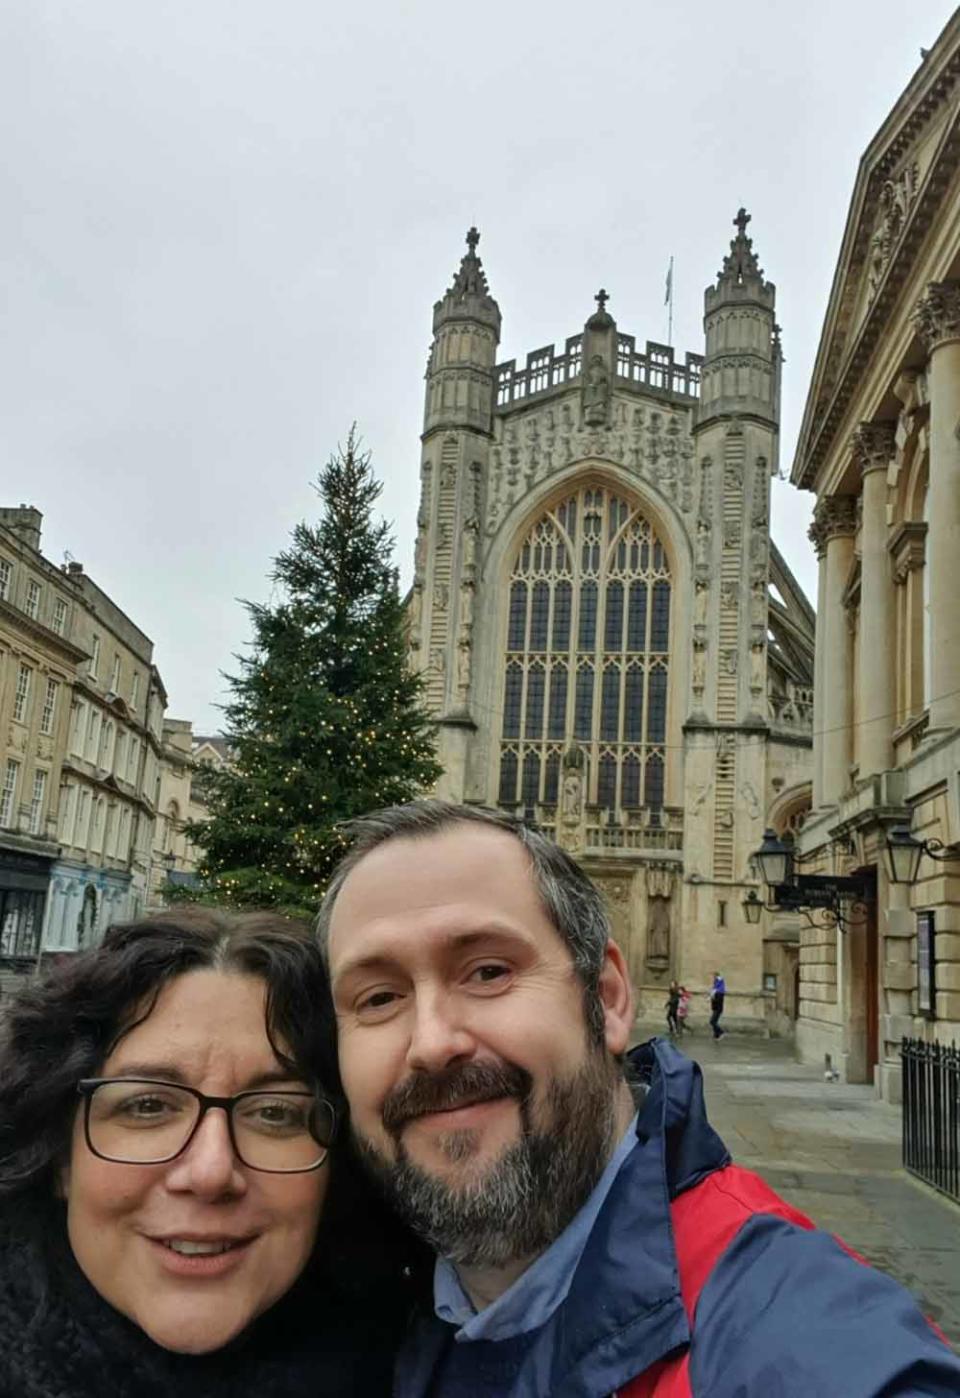 Carl and Susannah in front of Bath Abbey in December 2020 (Collect/PA Real Life).